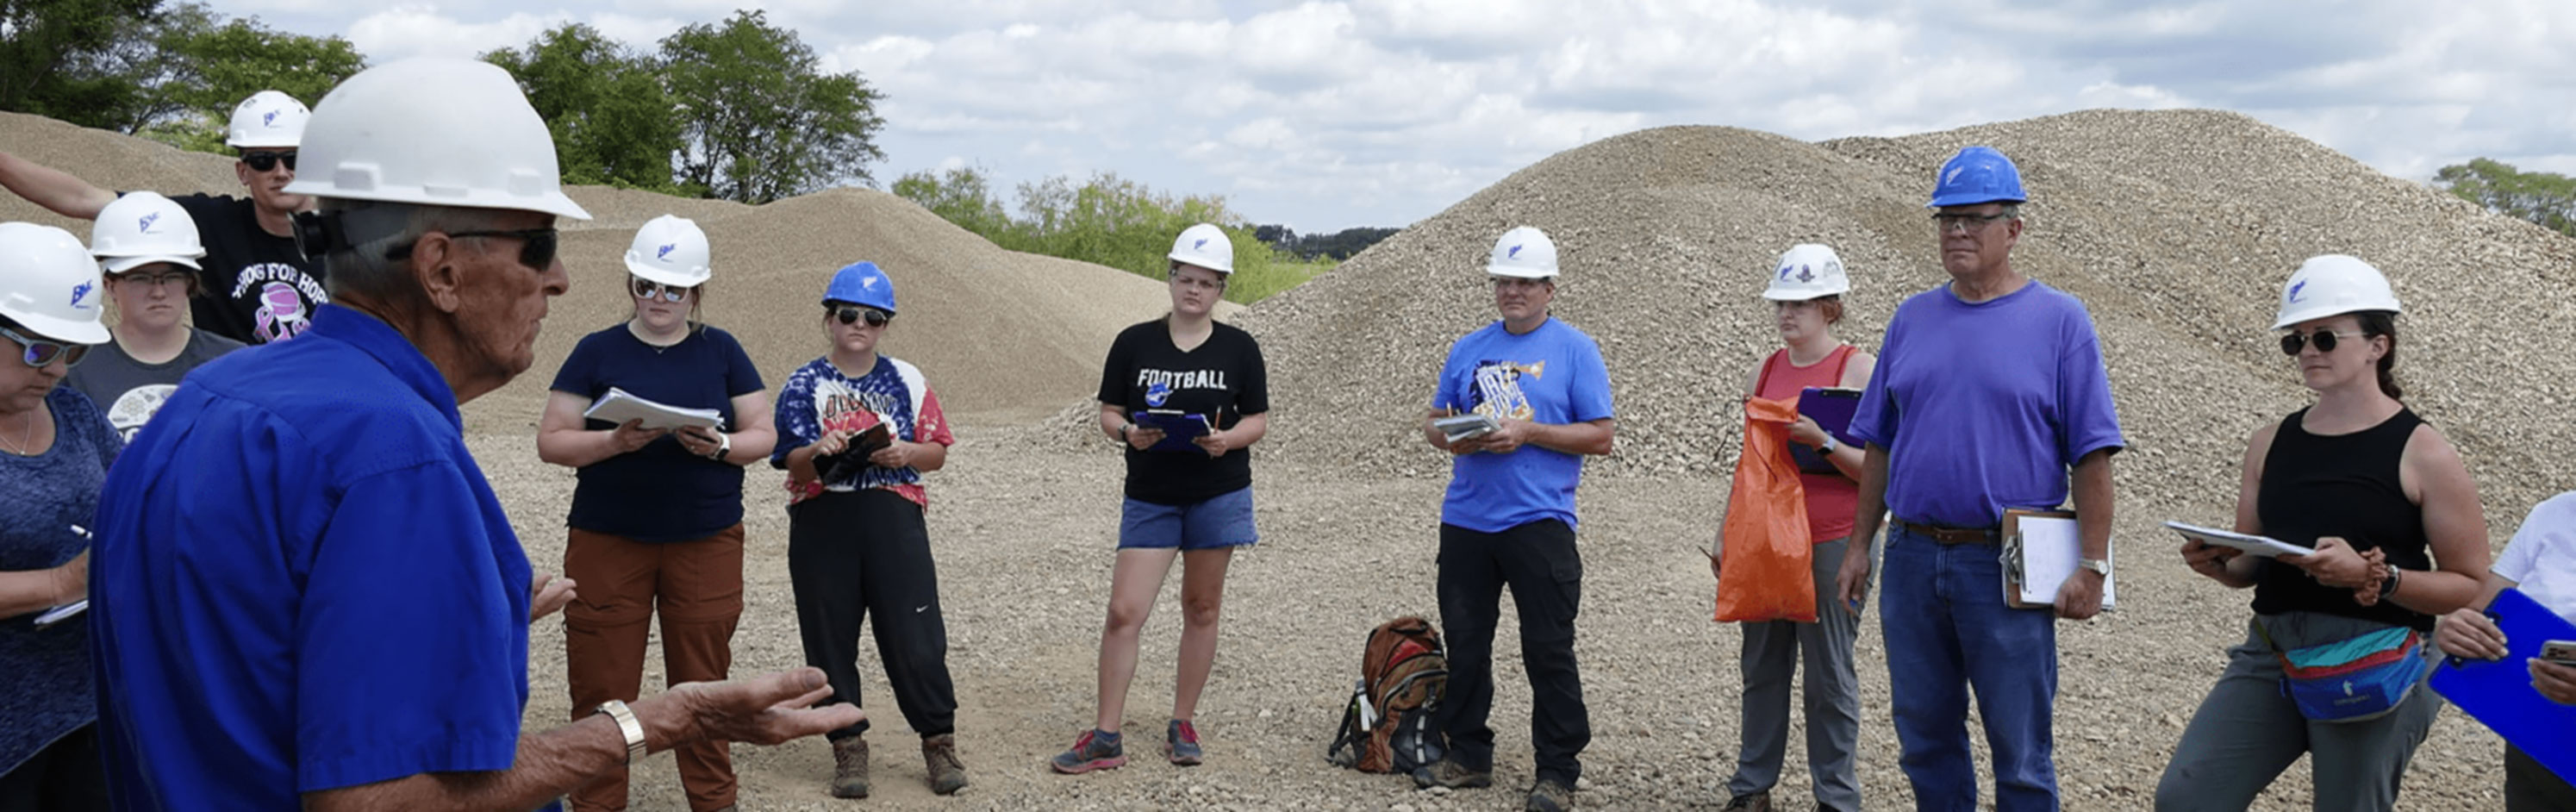 Students on a gravel site listening to a lecture.